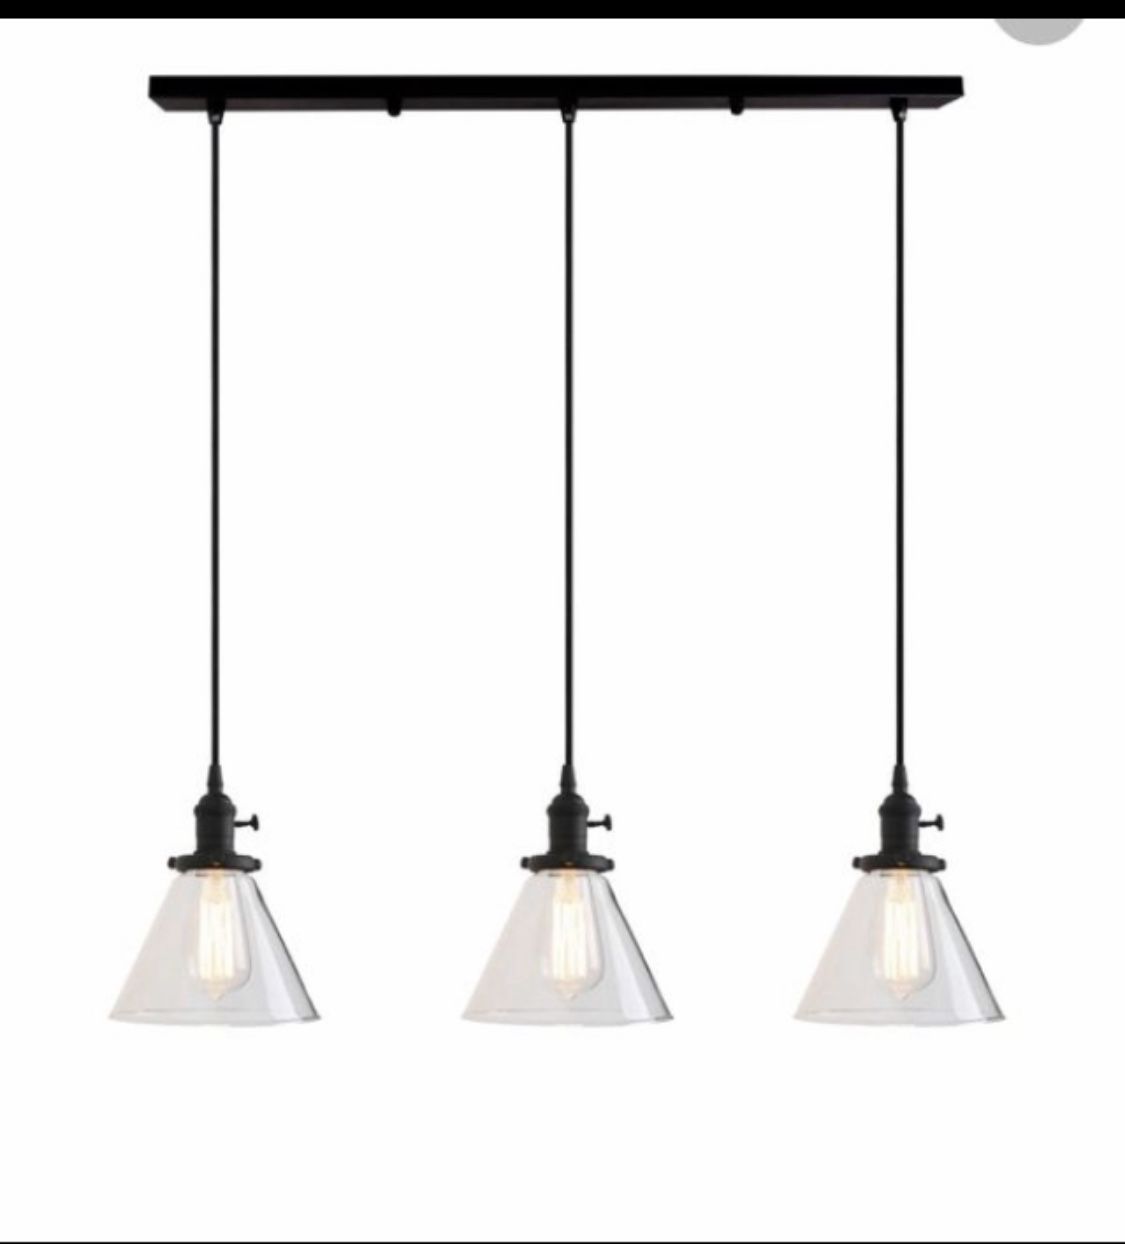 Permo Industrial Vintage Pendant light with Funnel Flared Glass Clear Glass Shade 3 light fixture no bulbs !